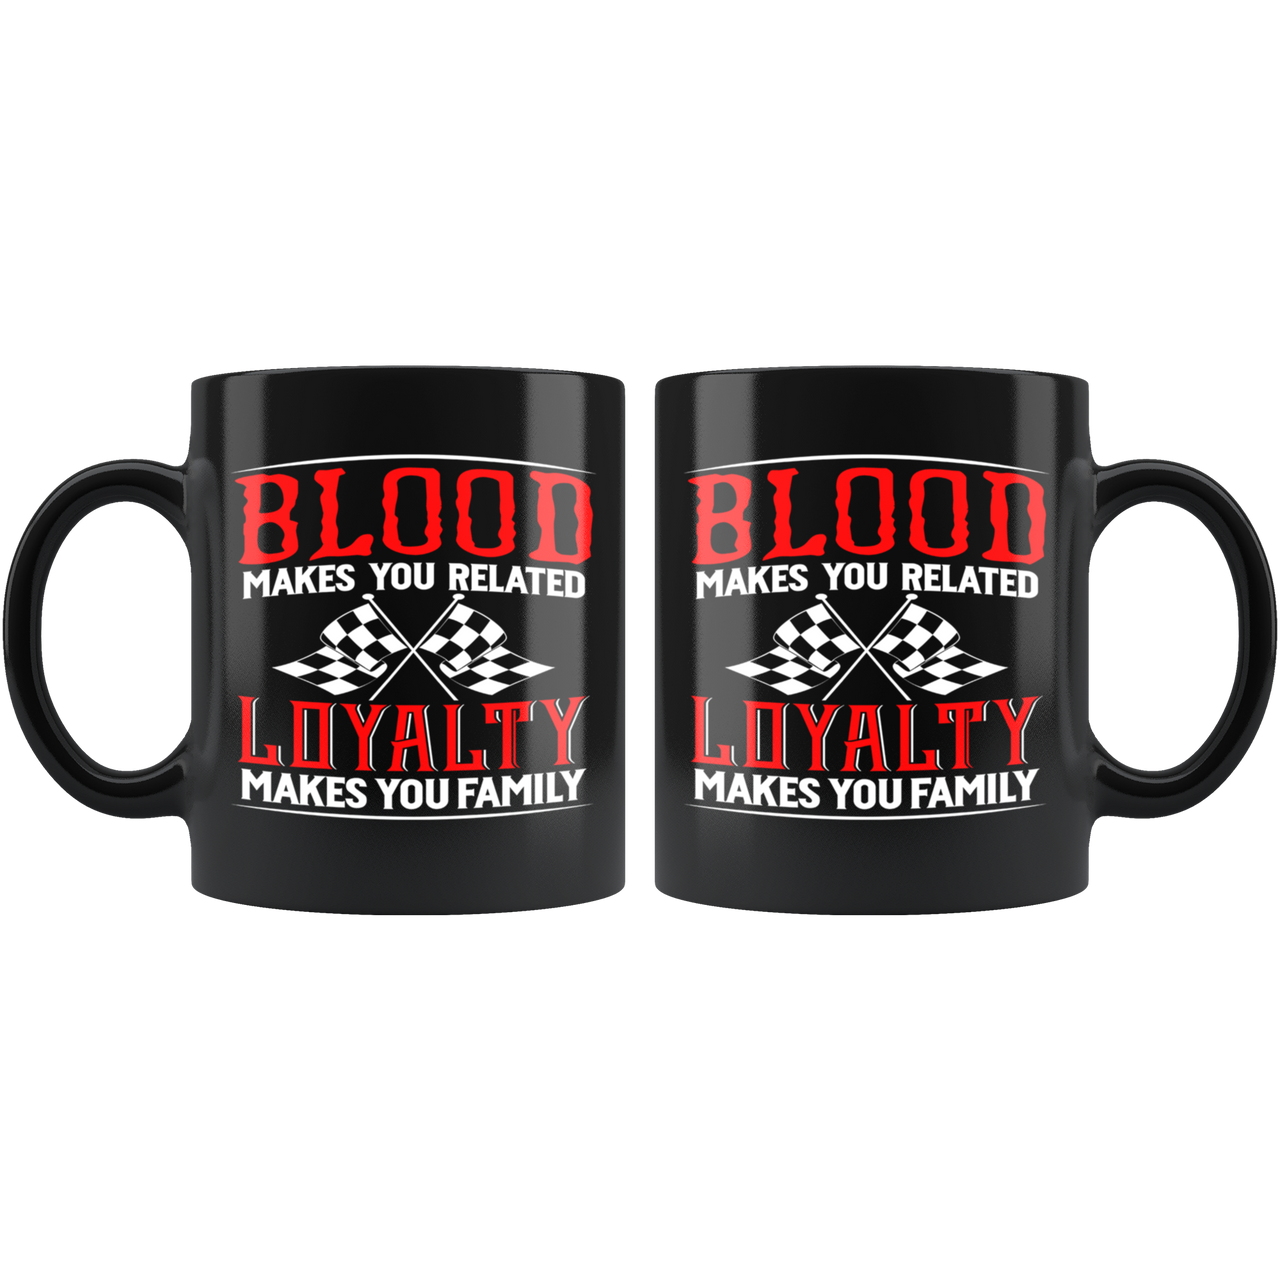 Blood Makes You Related Loyalty Makes You Family Mug!